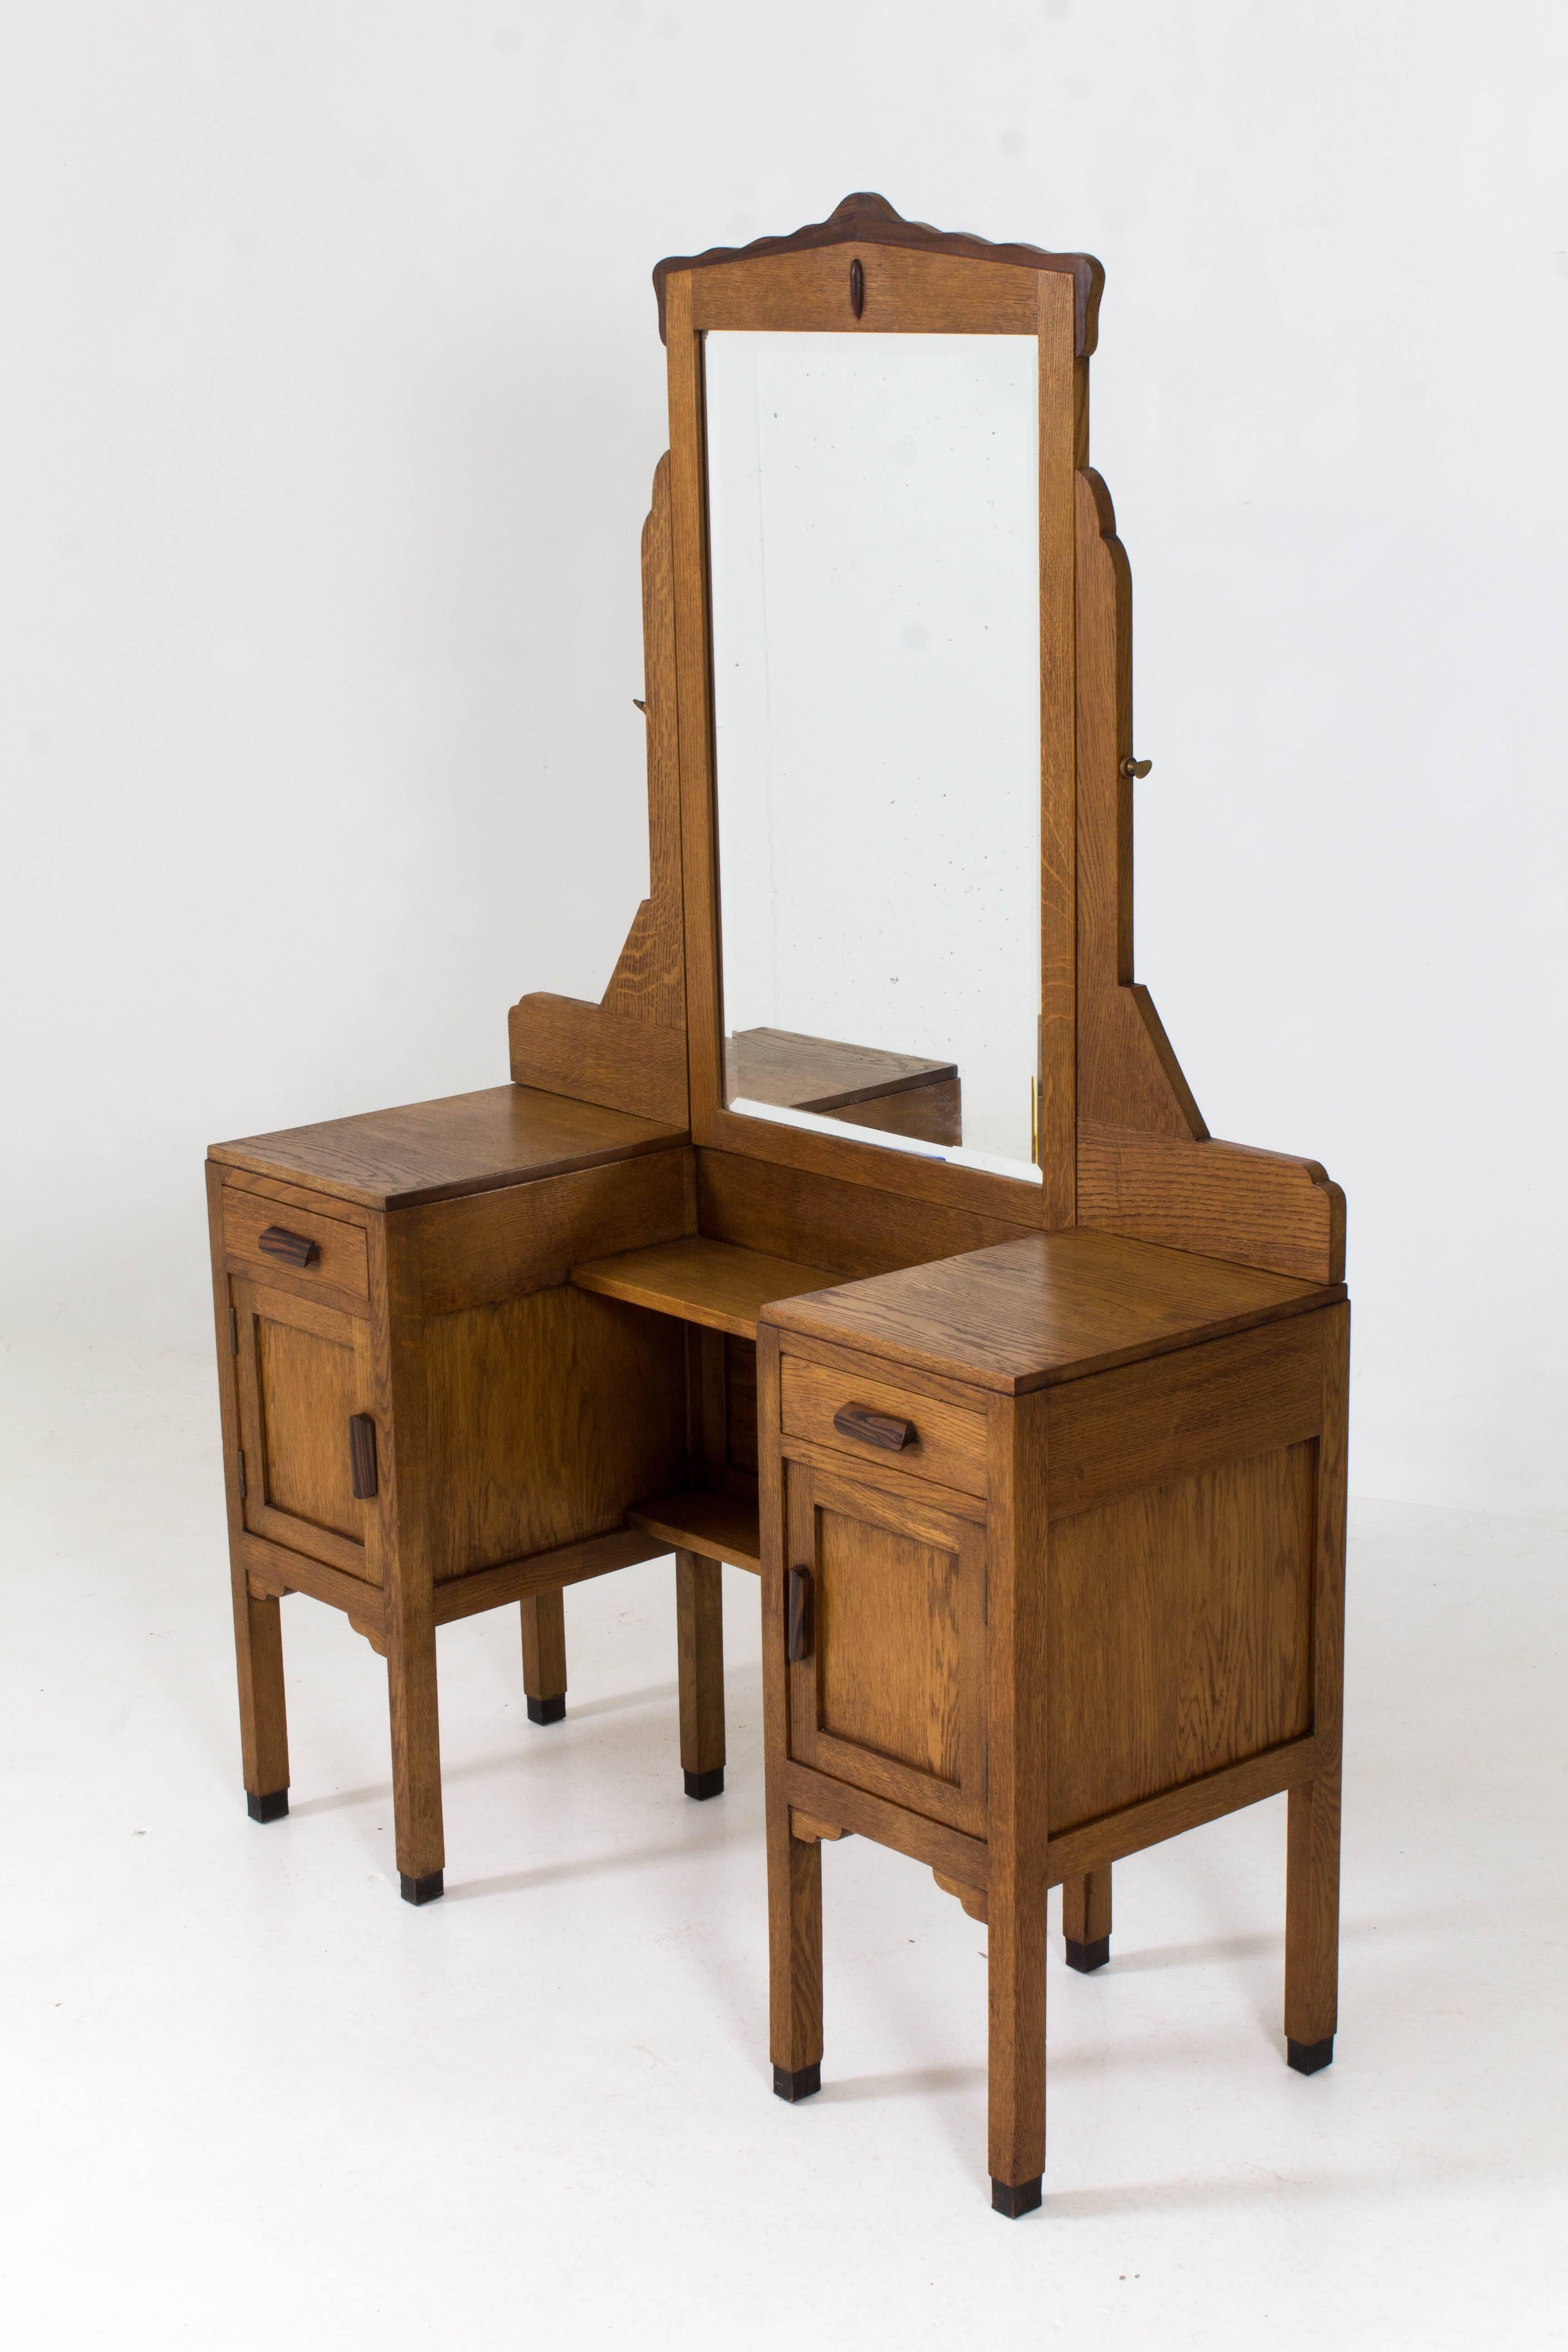 Stunning oak and ebony Macassar Art Deco Amsterdam School vanity or dressing table by Fa.Drilling Amsterdam, 1920s.
Original beveled mirror which is adjustable.
In very good condition with minor wear consistent with age and use,
preserving a